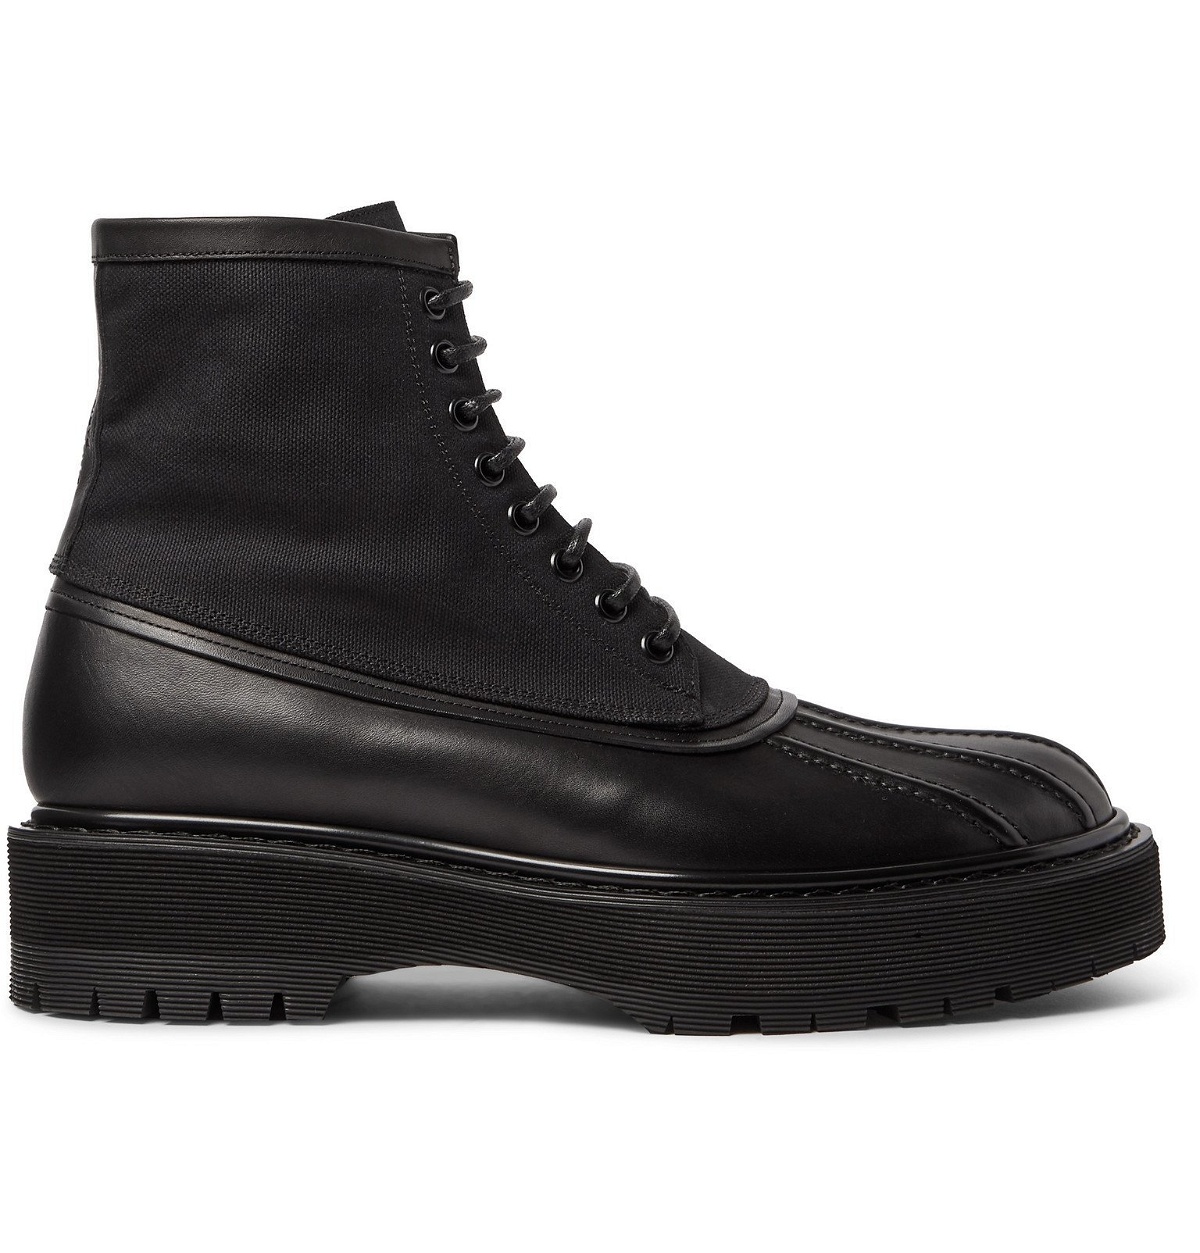 Givenchy - Camden Leather and Canvas Boots - Black Givenchy